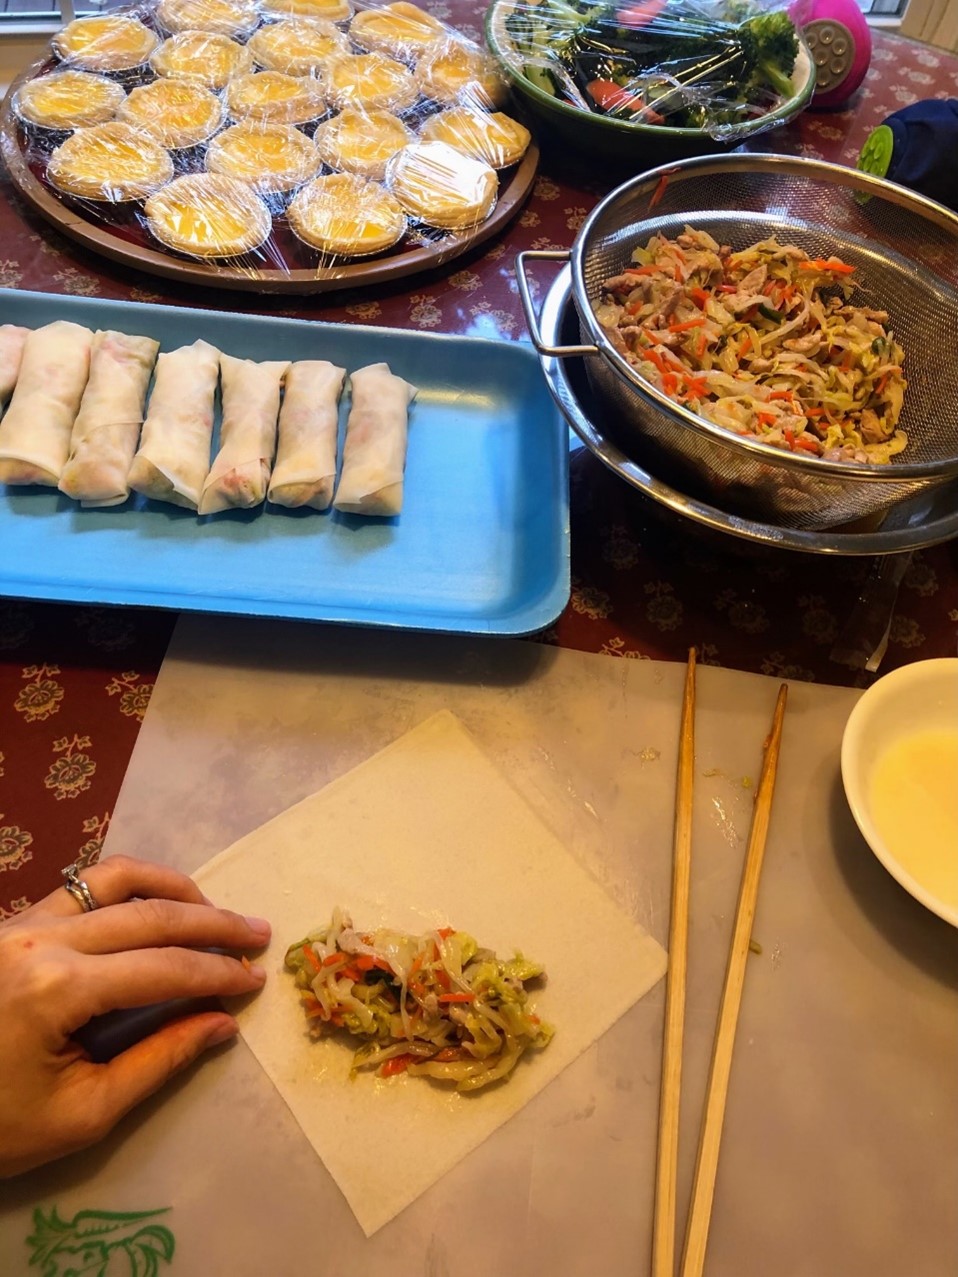 Perfecting the technique to wrap spring rolls takes patience and practice.